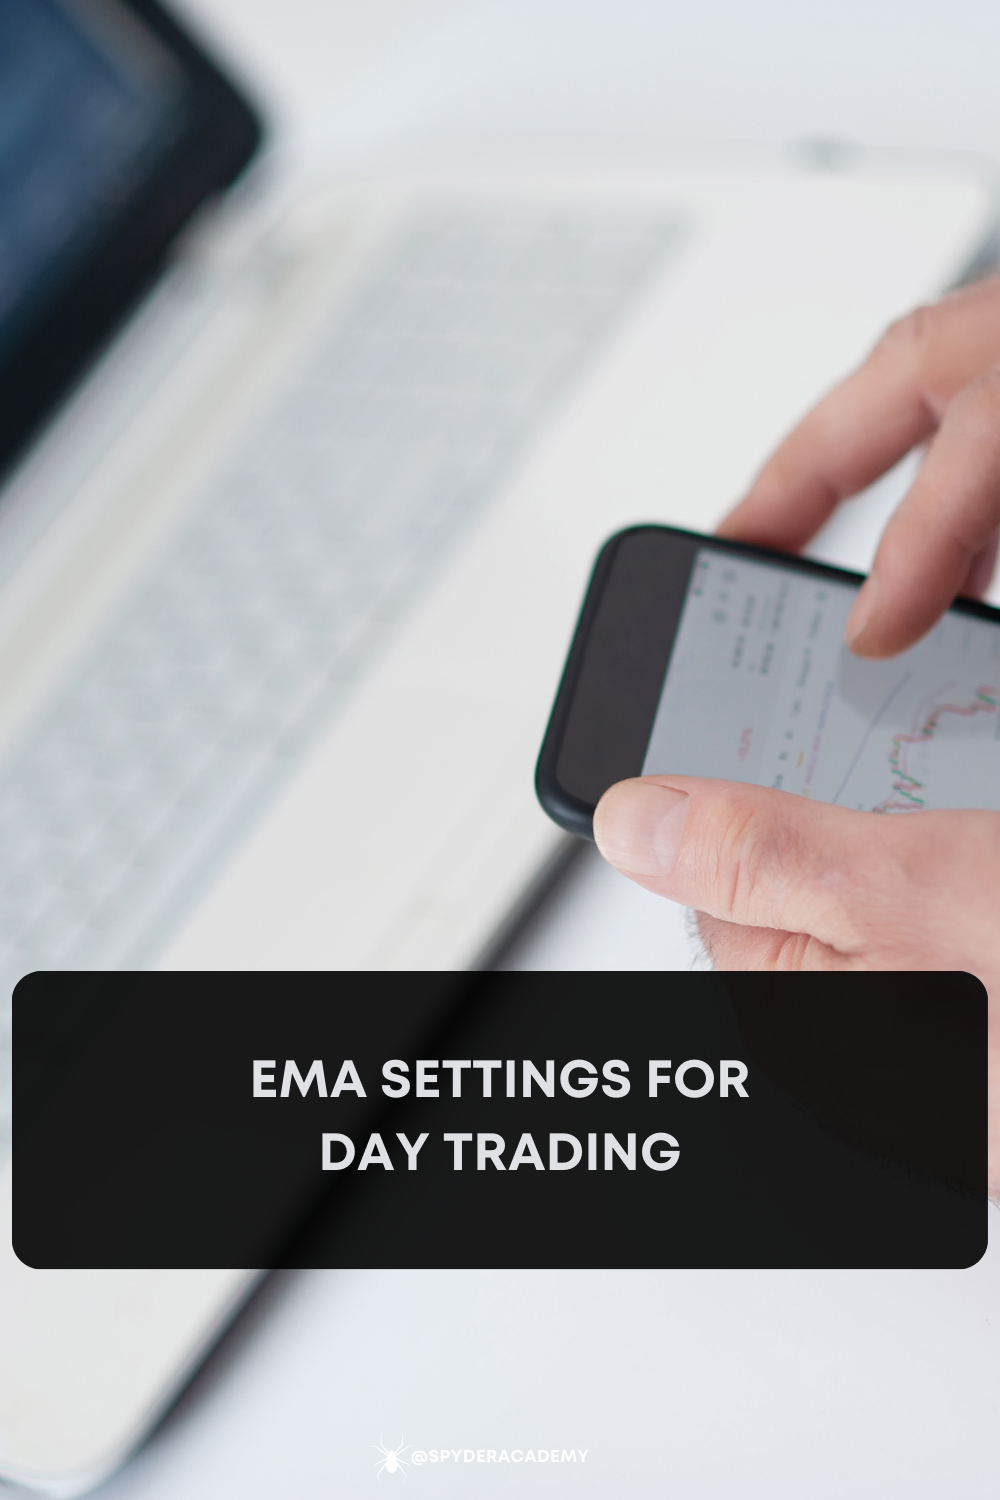 Explore the best EMA settings for day trading in 'Mastering Moving Averages' by CashMoneyTrades. Learn to use the 9 EMA for market trend analysis and strategy development in day trading. This guide covers EMA fundamentals, trend identification, and integration with other indicators for improved trading decisions. Ideal for both new and experienced traders.